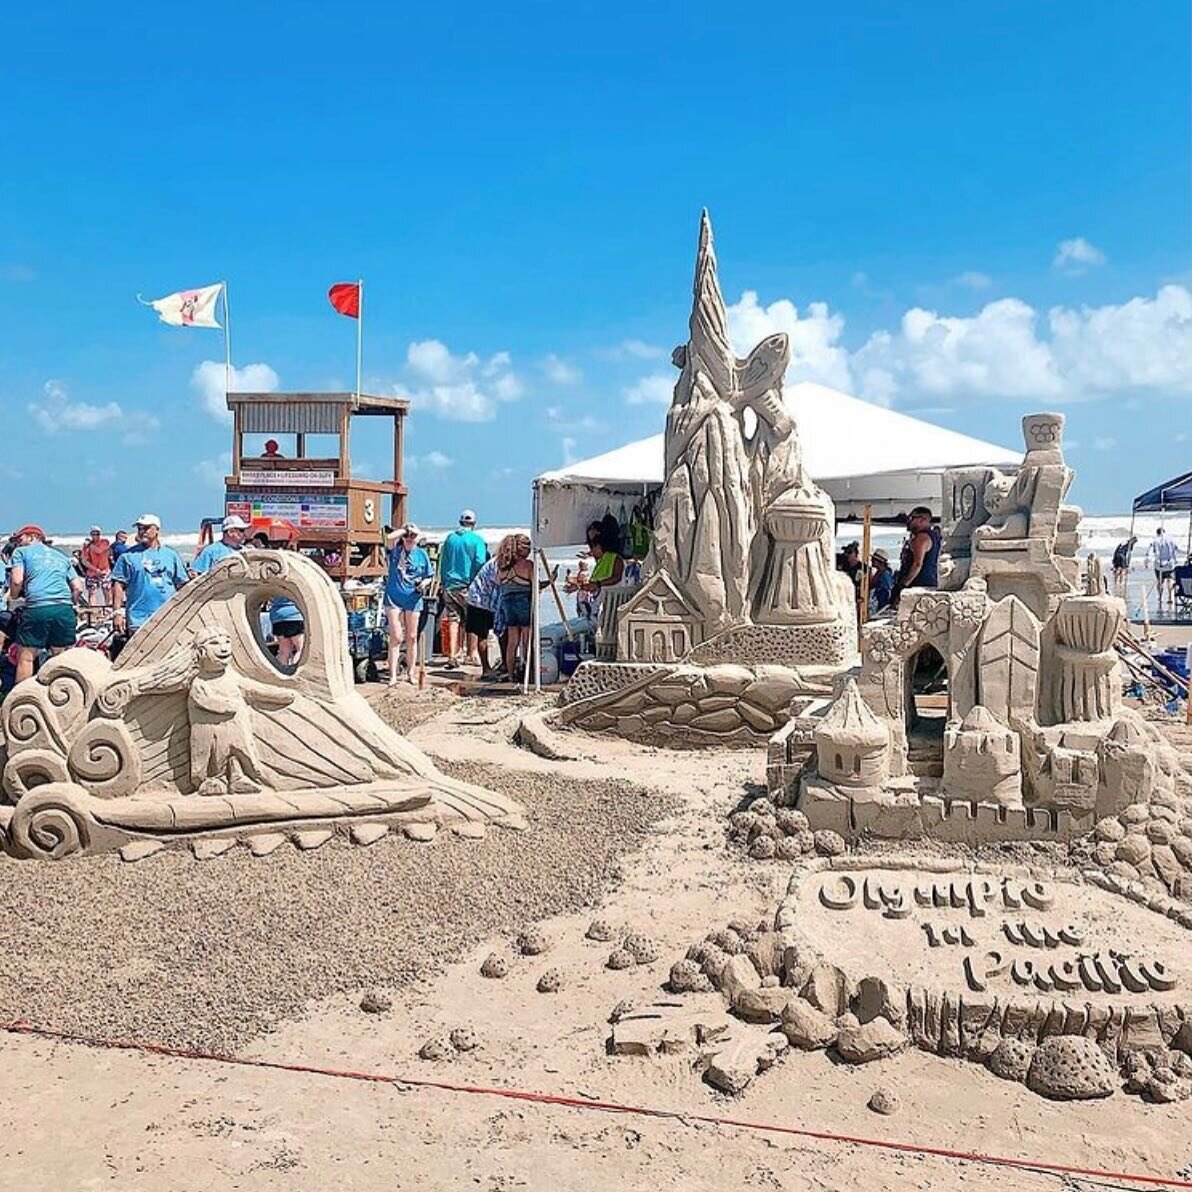 ⛱AIA Annual Sandcastle Competition this Weekend! #galvestontx 

📸Event Repost Photo Credit Goes to Brooke @aesthetically_galveston 

▶️Repost &amp; Event Info!👇🏼@galvestonlifestyle 

#galvestonbeach #galvestonisland #galvestonlifestyle #sandcastle